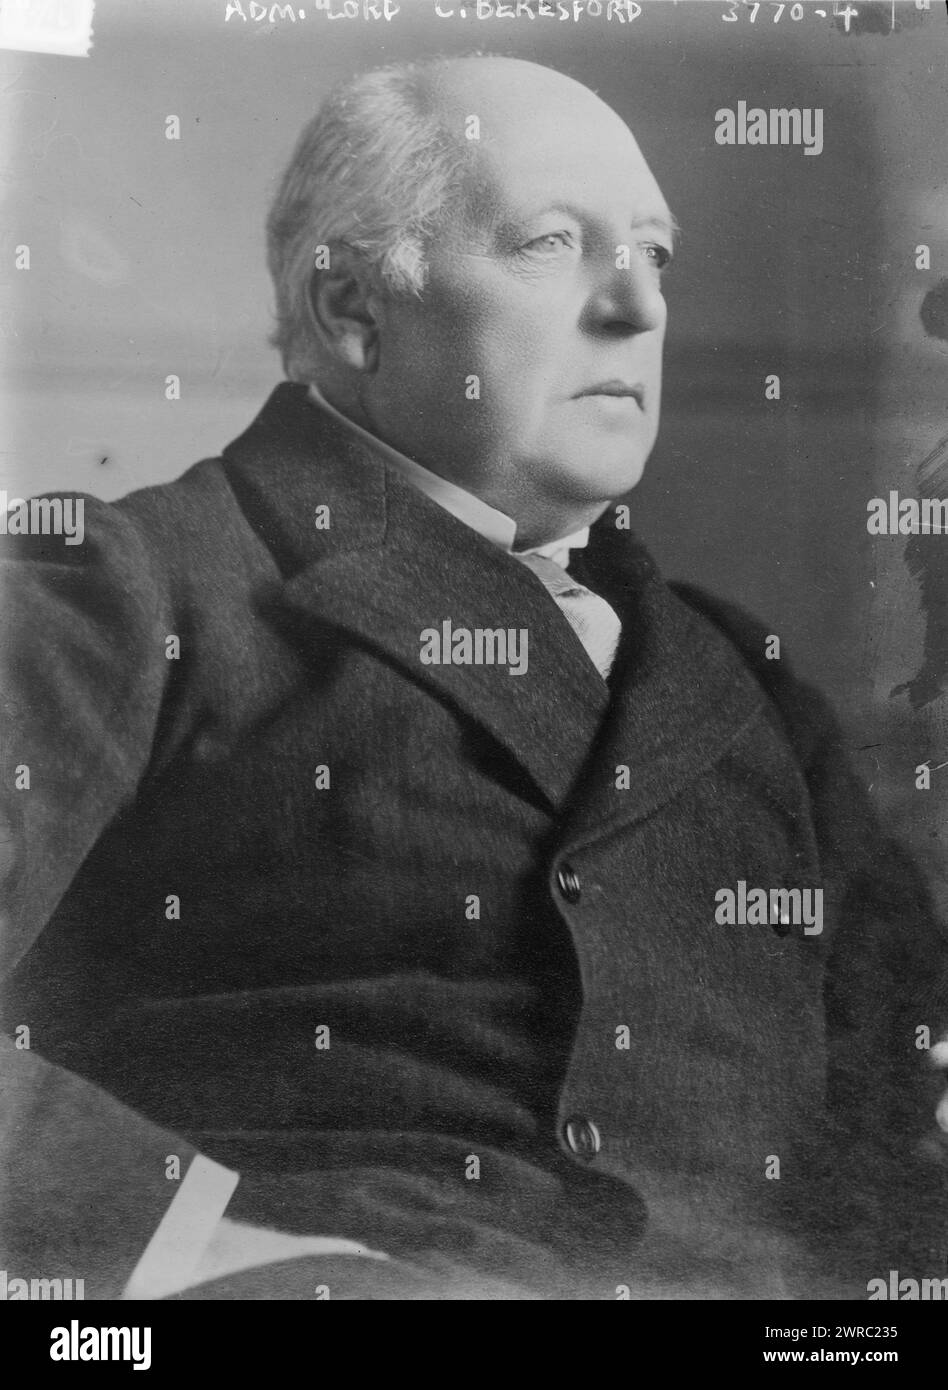 Adm. Lord C. Beresford, Photograph shows Charles William de la Poer Bereford (1846-1919) who was a British admiral and member of Parliament., between ca. 1915 and 1919, Glass negatives, 1 negative: glass Stock Photo